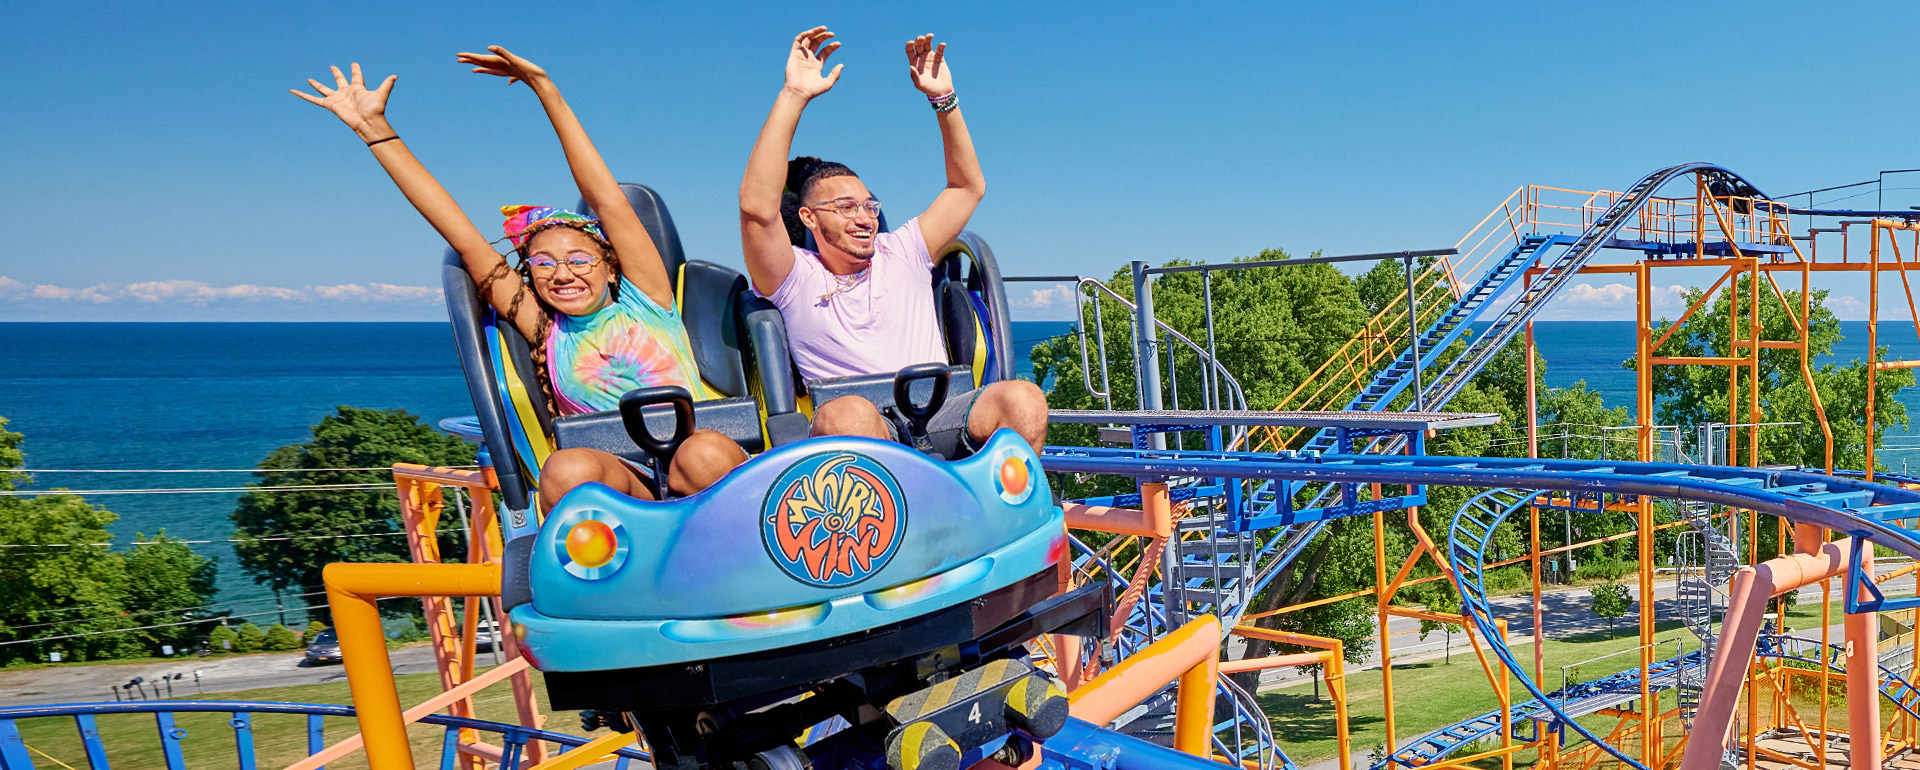 Teens riding on the Whirlwind coaster.